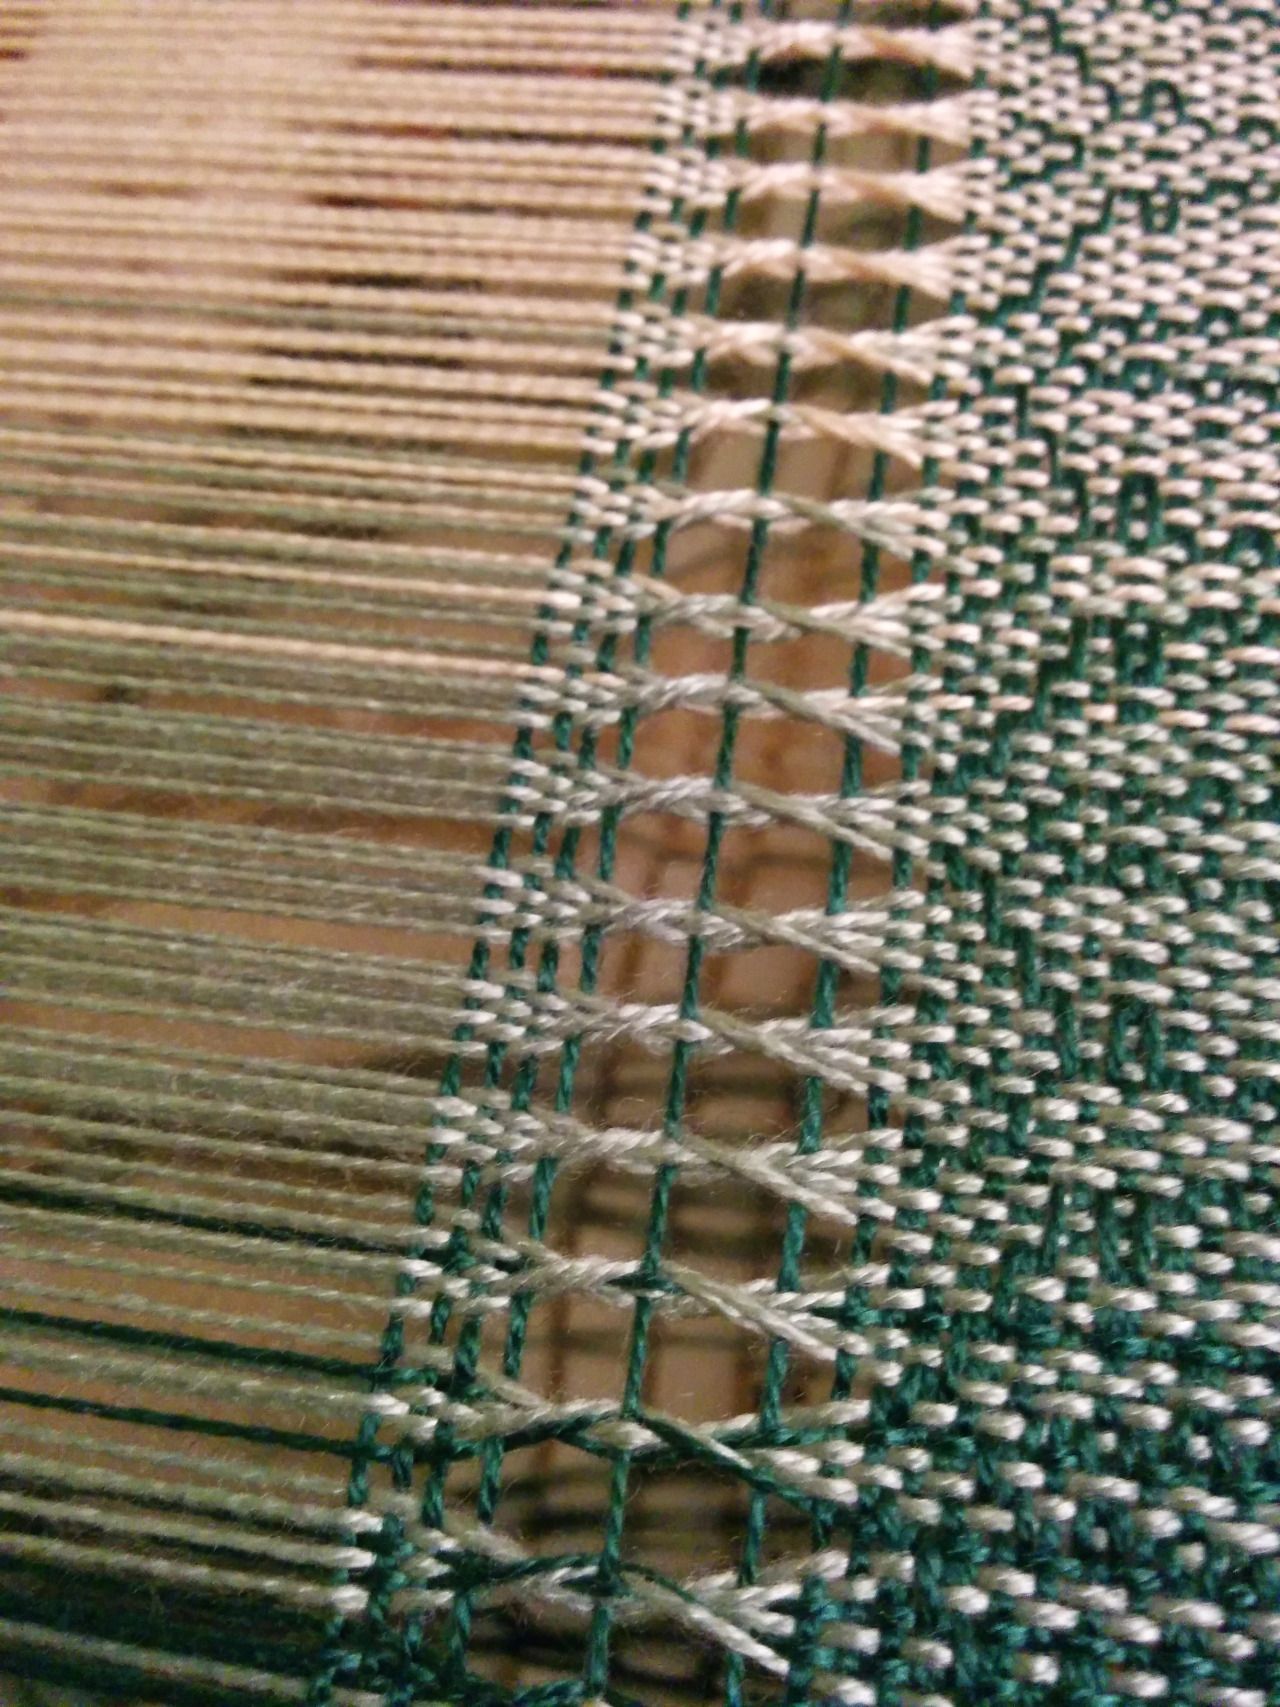 Leno Lace is an on the loom lace weaving technique that consists of ...